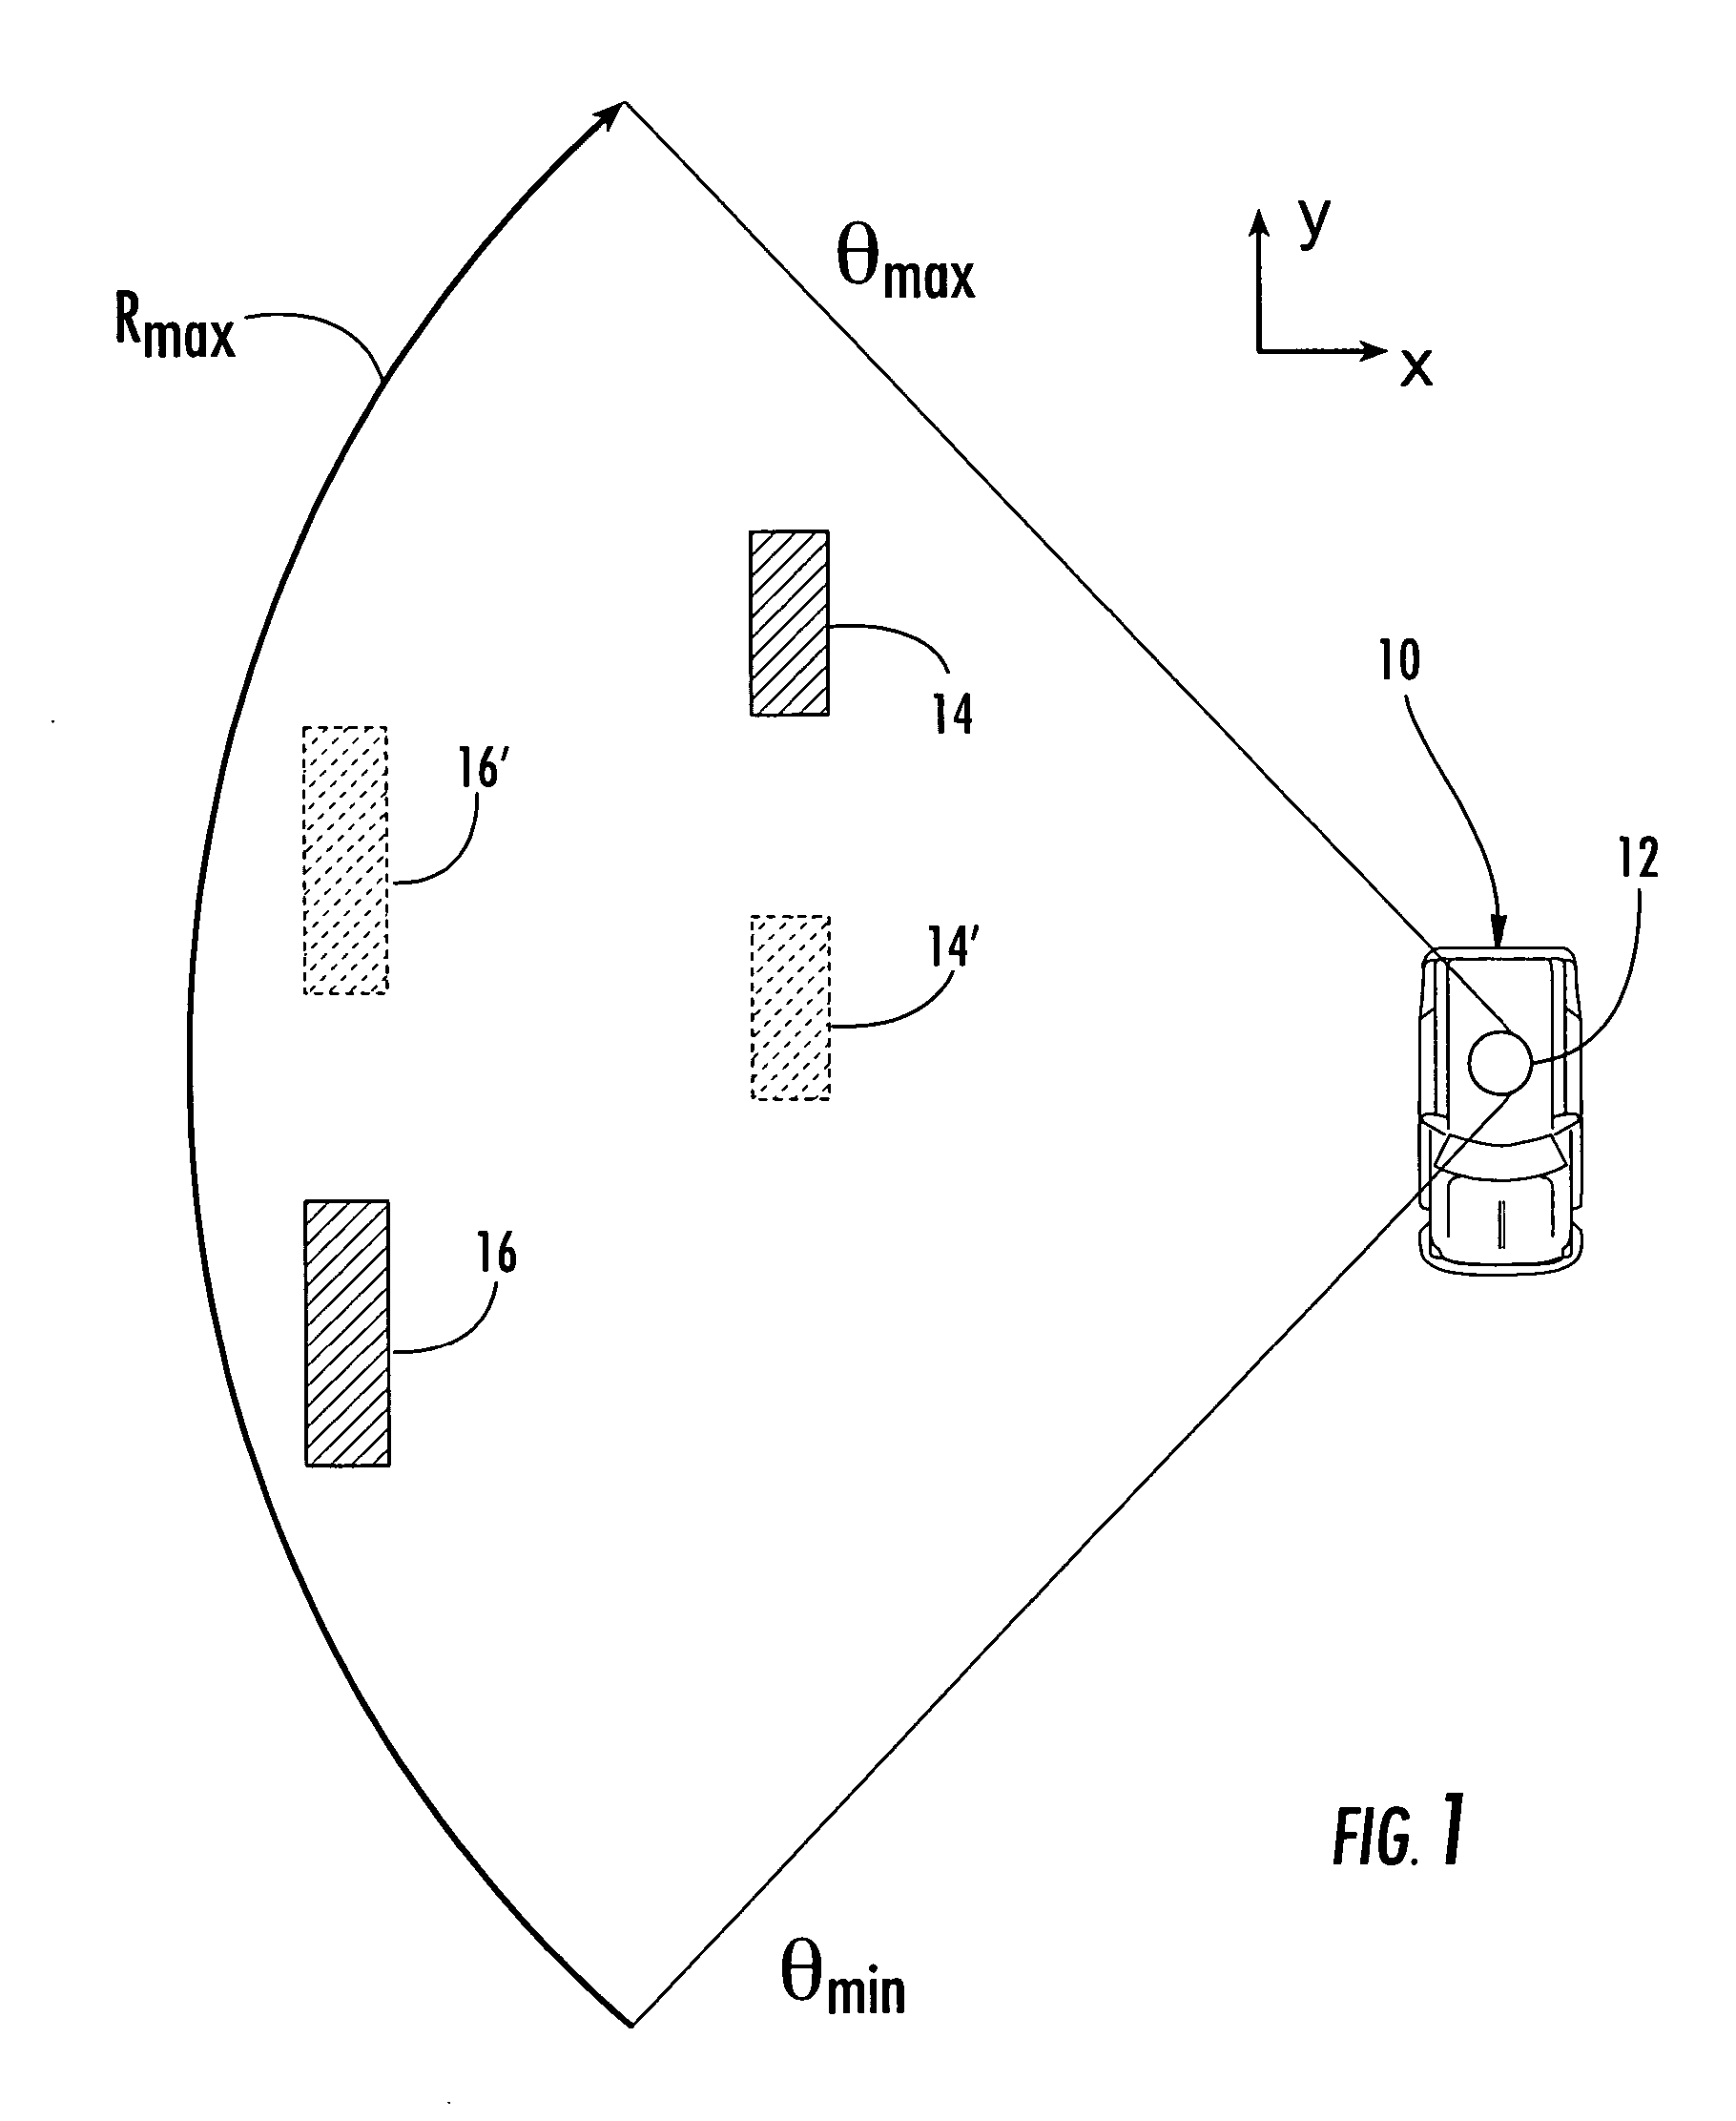 Method, apparatus, and computer program product for radar detection of moving target